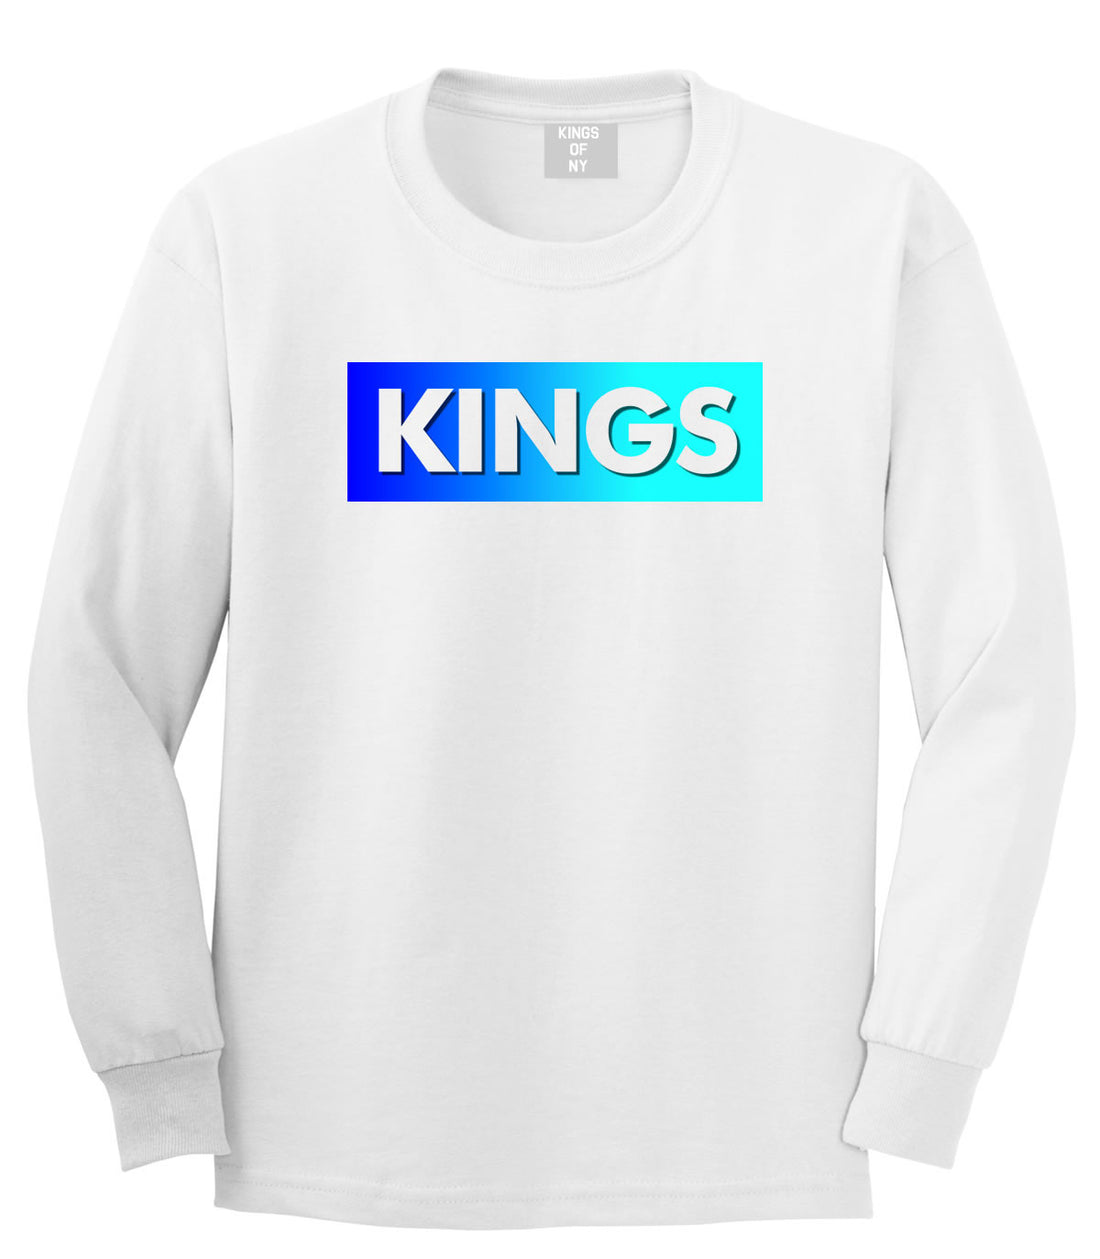 Kings Blue Gradient Boys Kids Long Sleeve T-Shirt in White by Kings Of NY